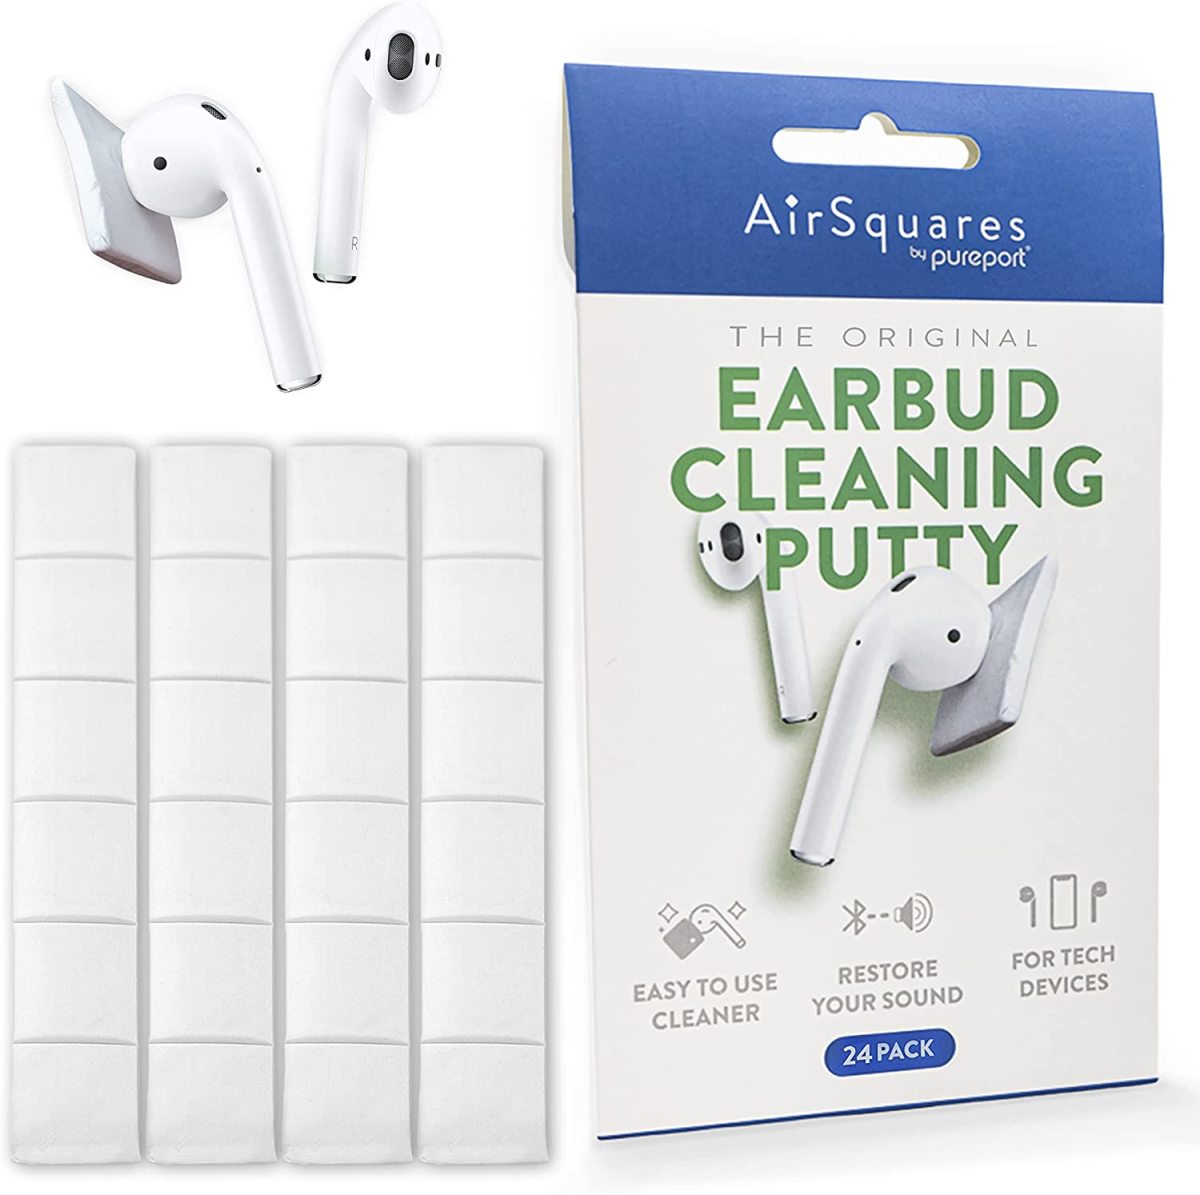 airsquares earbuds cleaning putty